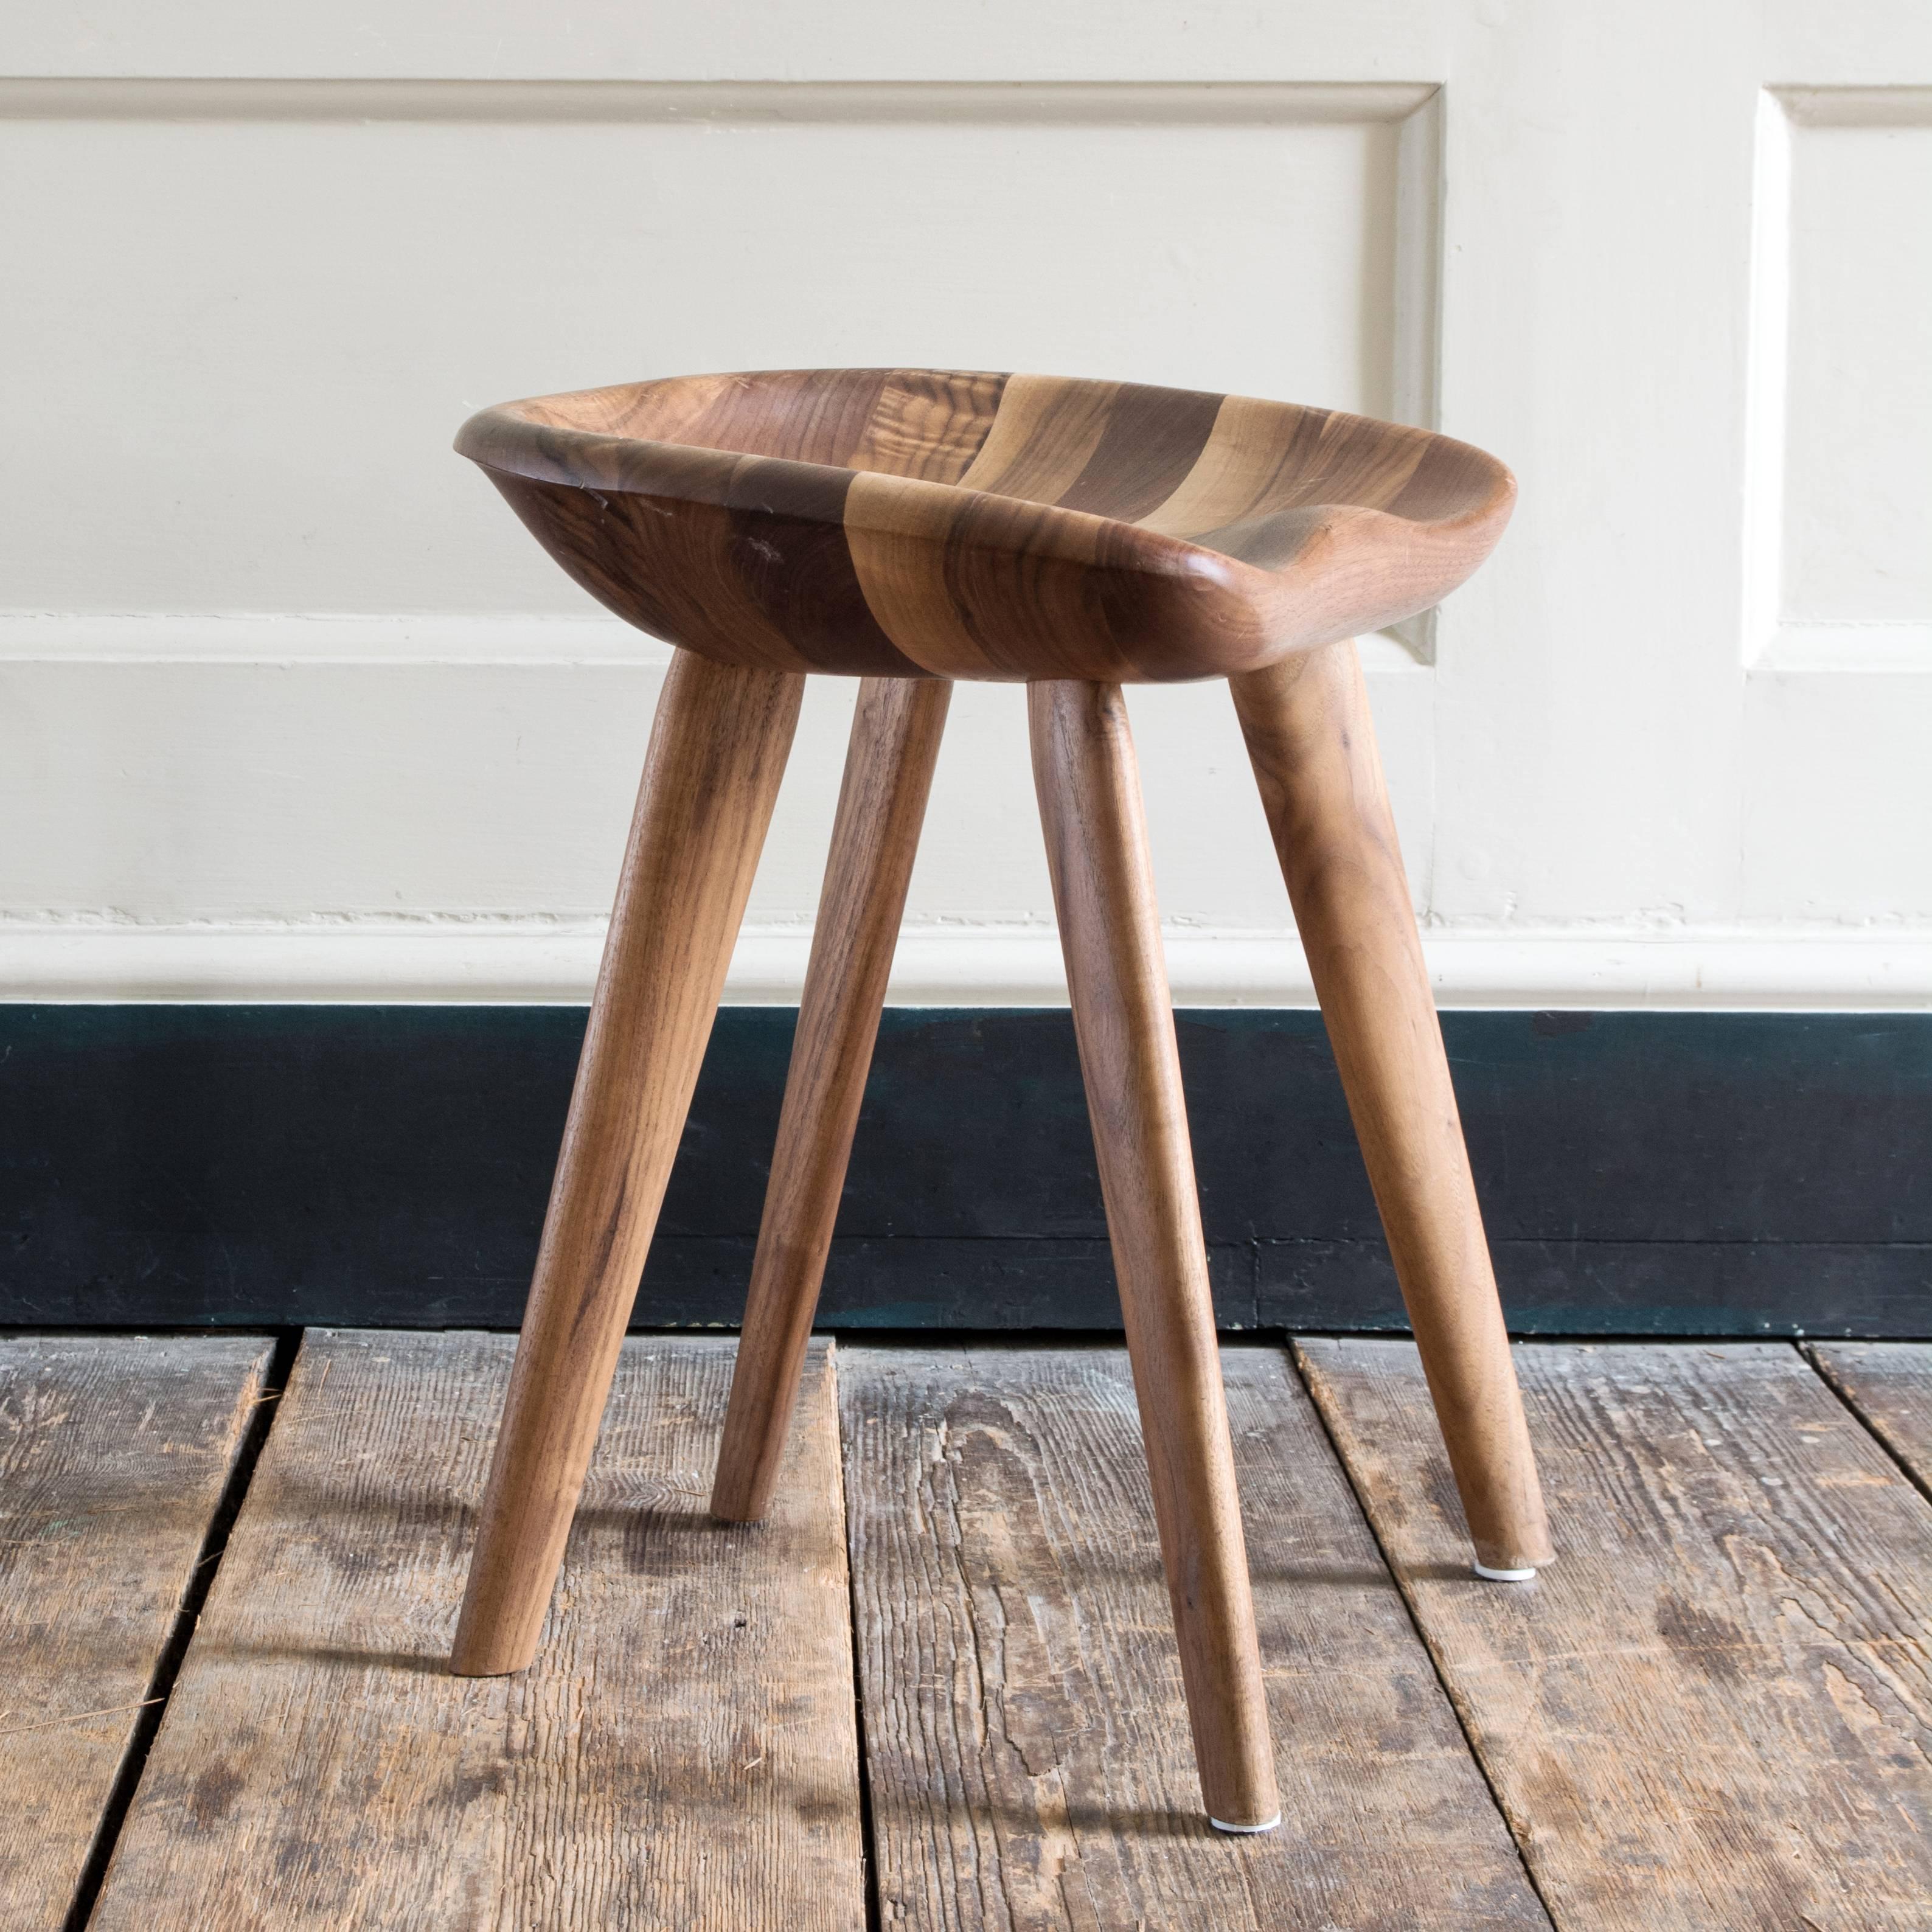 Bassam Fellows walnut 'tractor' stools. Eight available.

Dimensions: 49cm (19¼